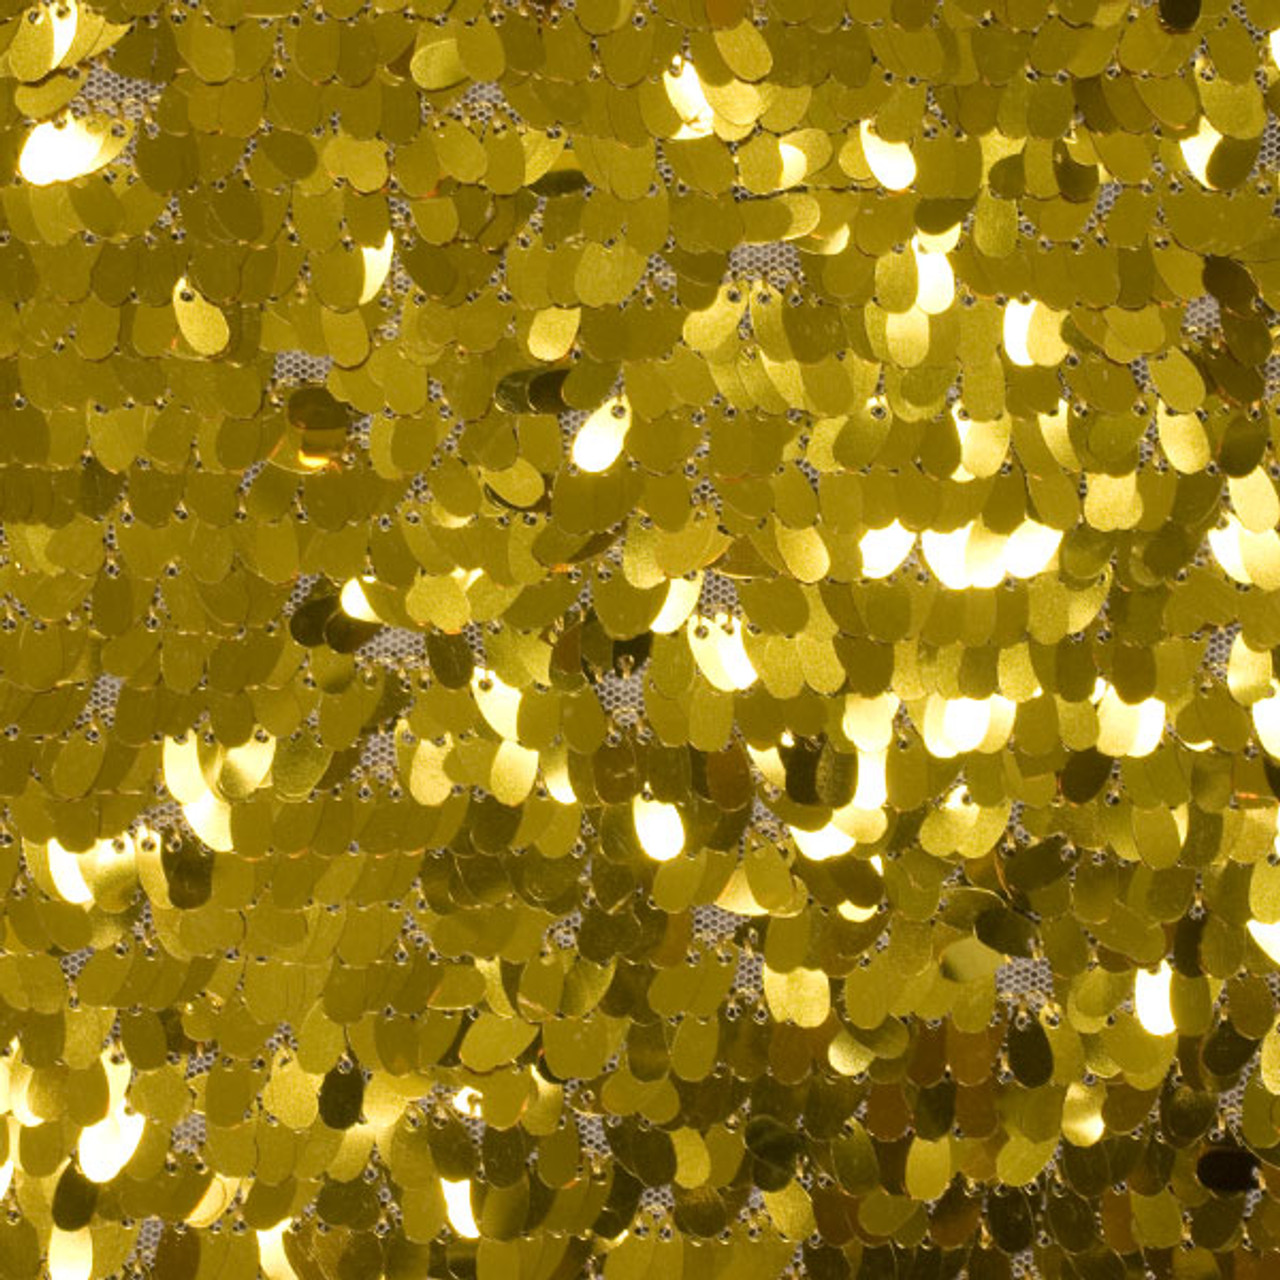 Gold Sequin Fabric Sparkly Shiny Bling Material Cloth 130cm Wide 1 1/2 metre